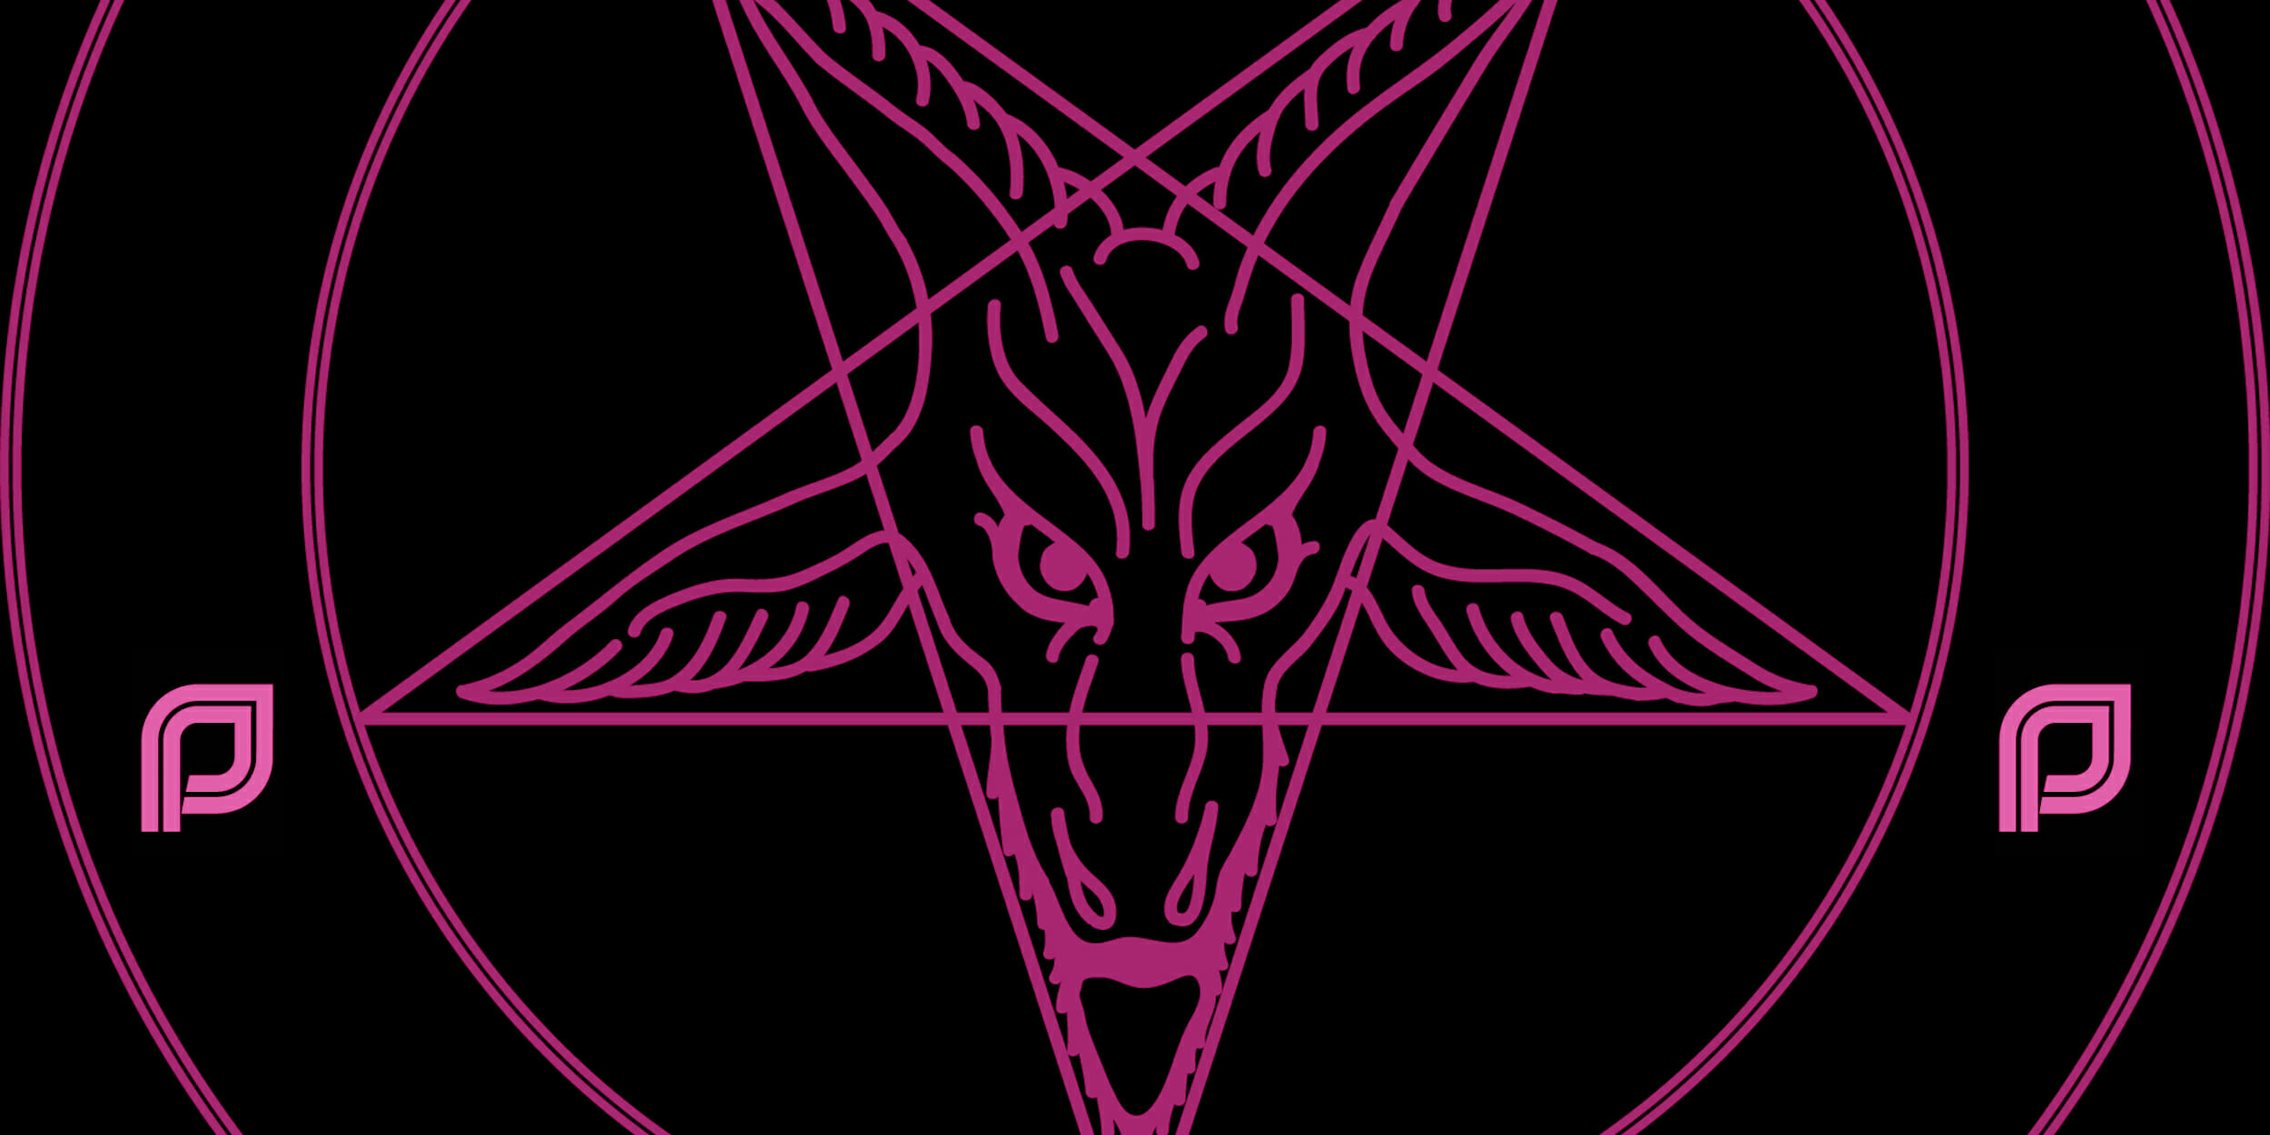 Sigil of Baphomet in pink with Planned Parenthood logos